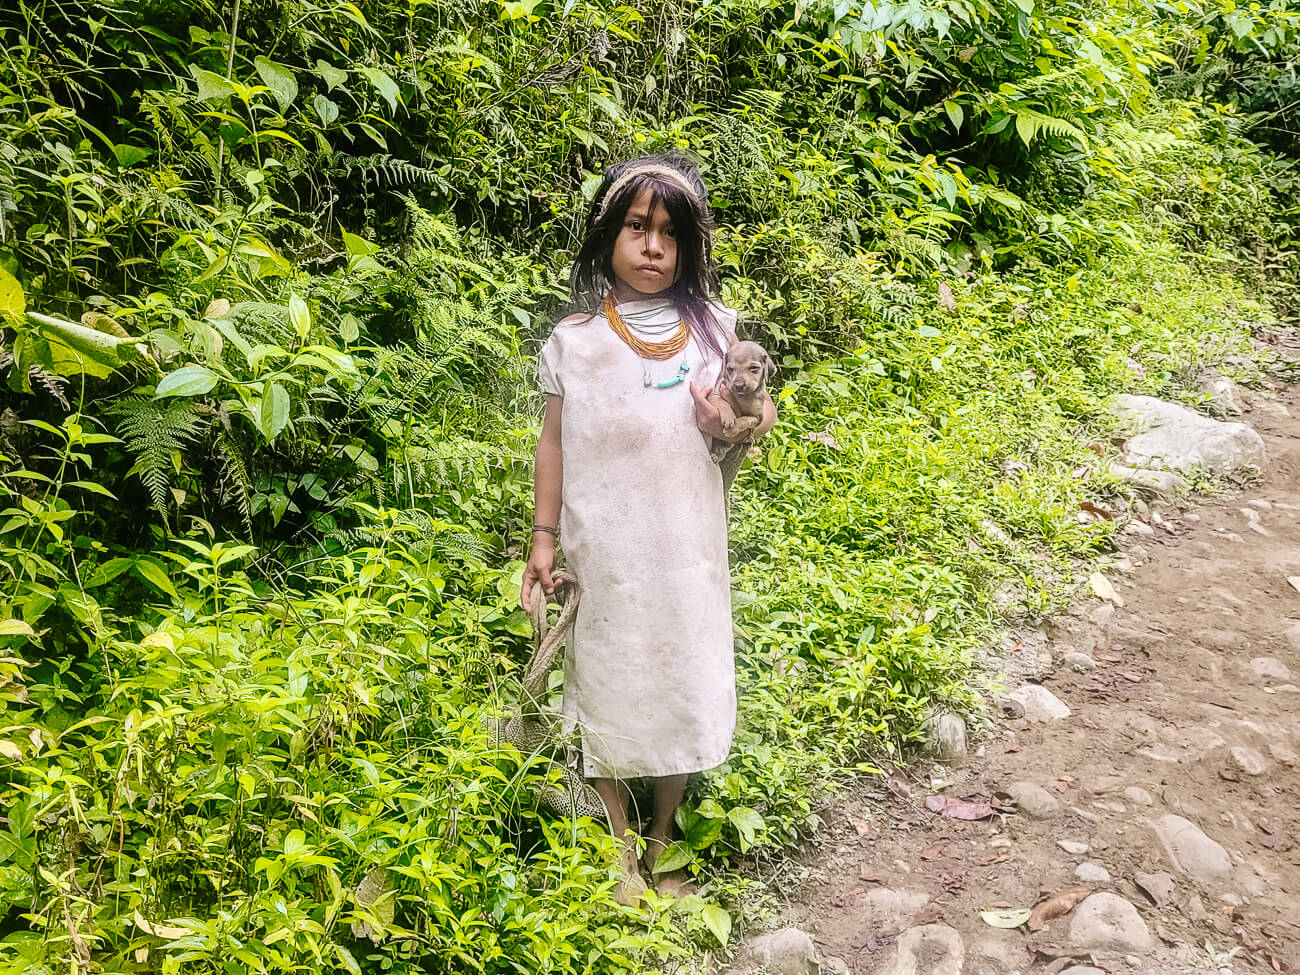 indigenous girl with dog in Sierra Nevada de Colombia